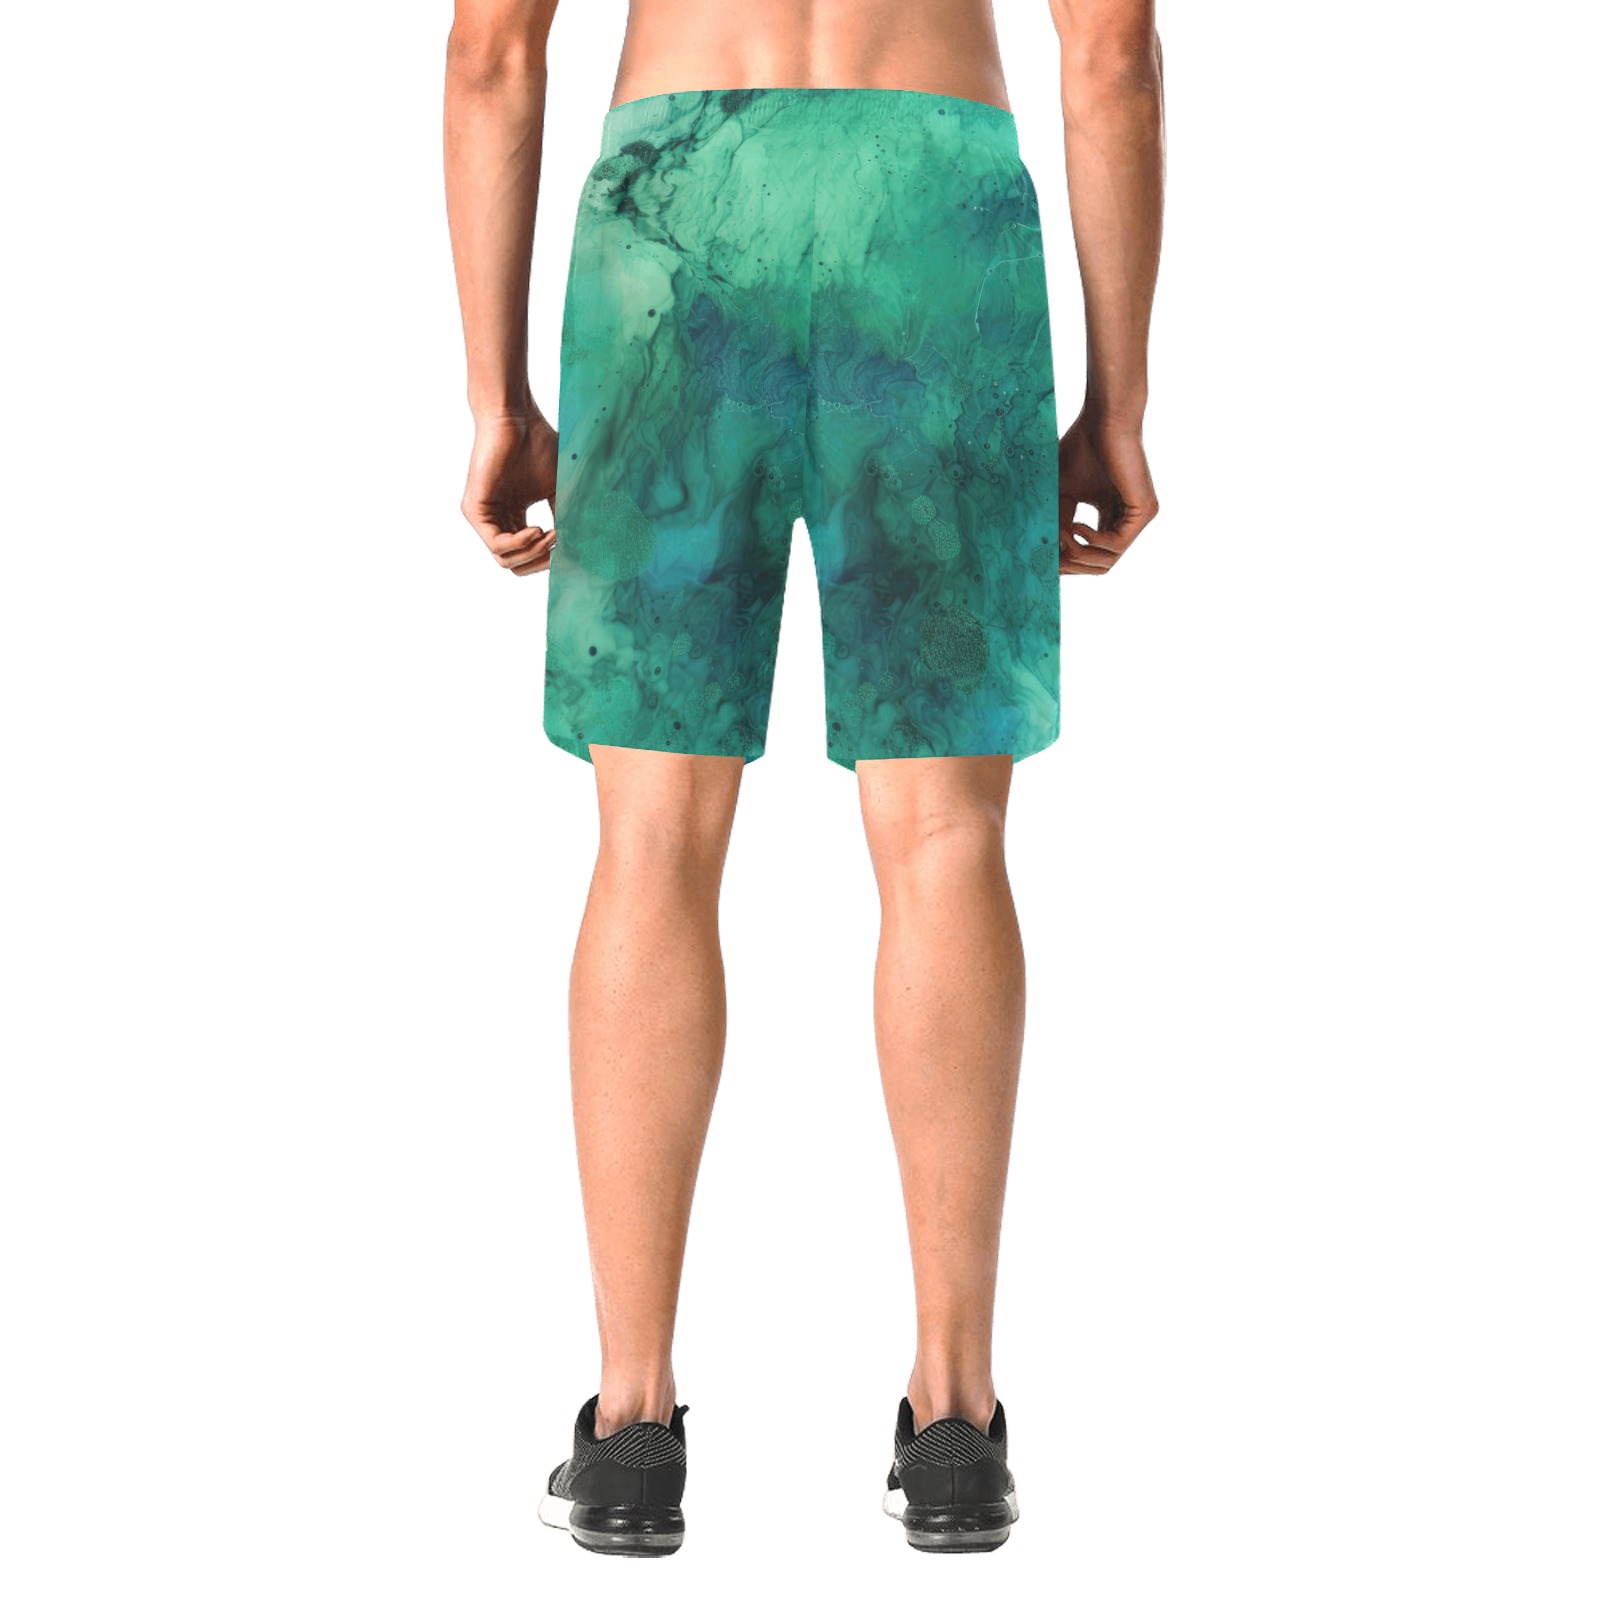 CG_a_green_and_blue_textured_surface_in_the_style_of_fluid_ink__8ea3f316-602e-4f64-bcf8-c283f84ca5b3 Men's All Over Print Elastic Beach Shorts (Model L20)